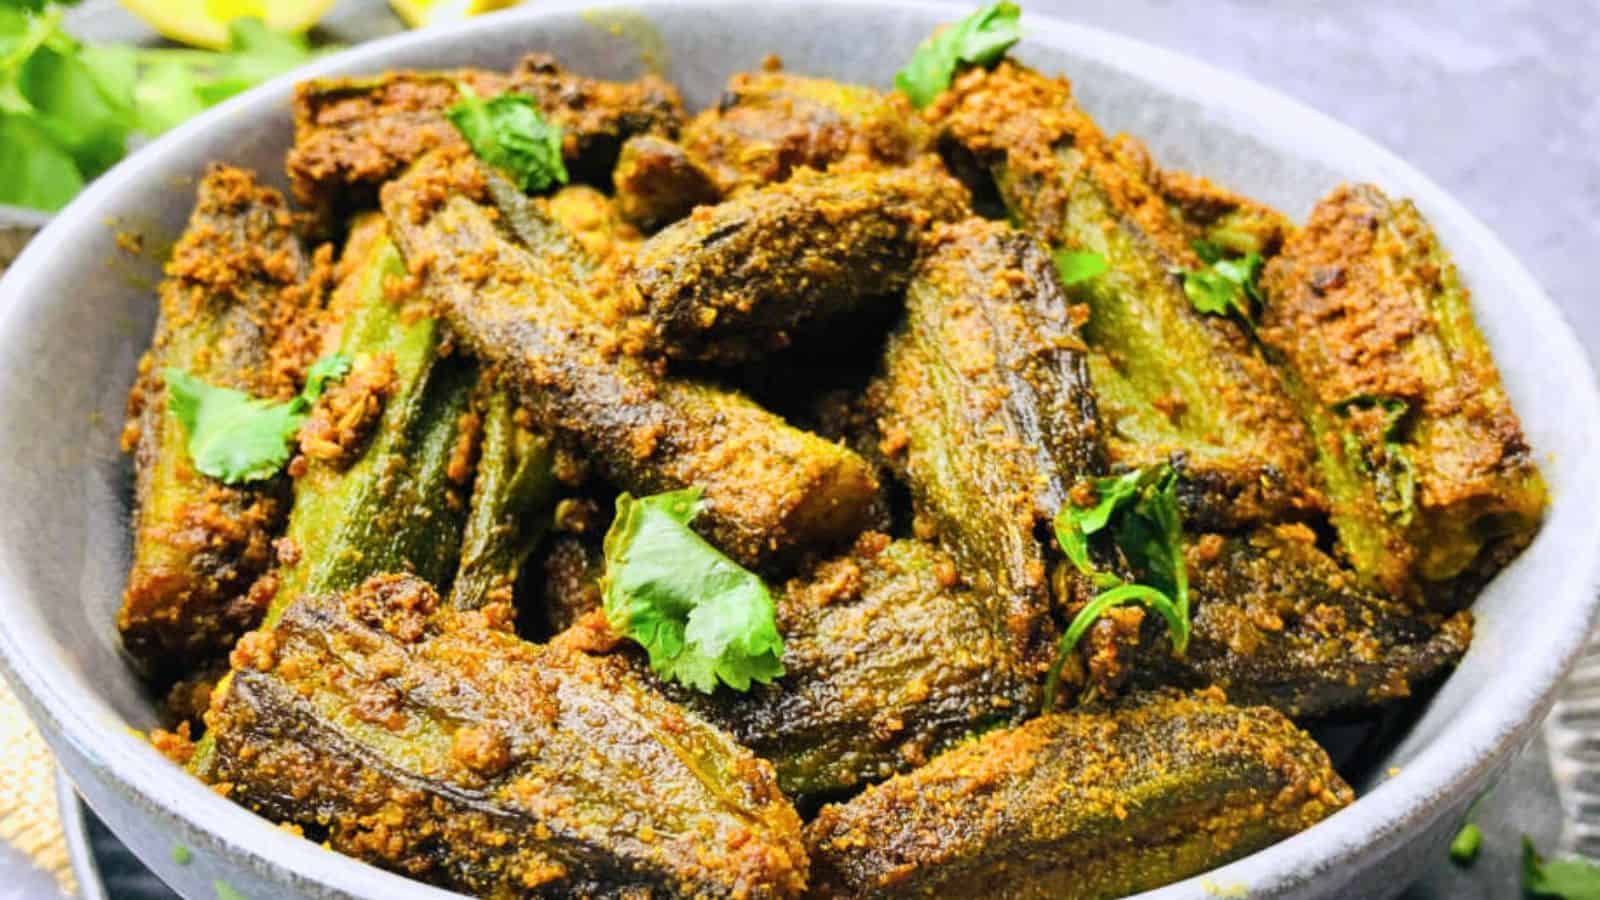 A bowl of Bharwa Bhindi garnished with fresh cilantro, served on a textured tablecloth.